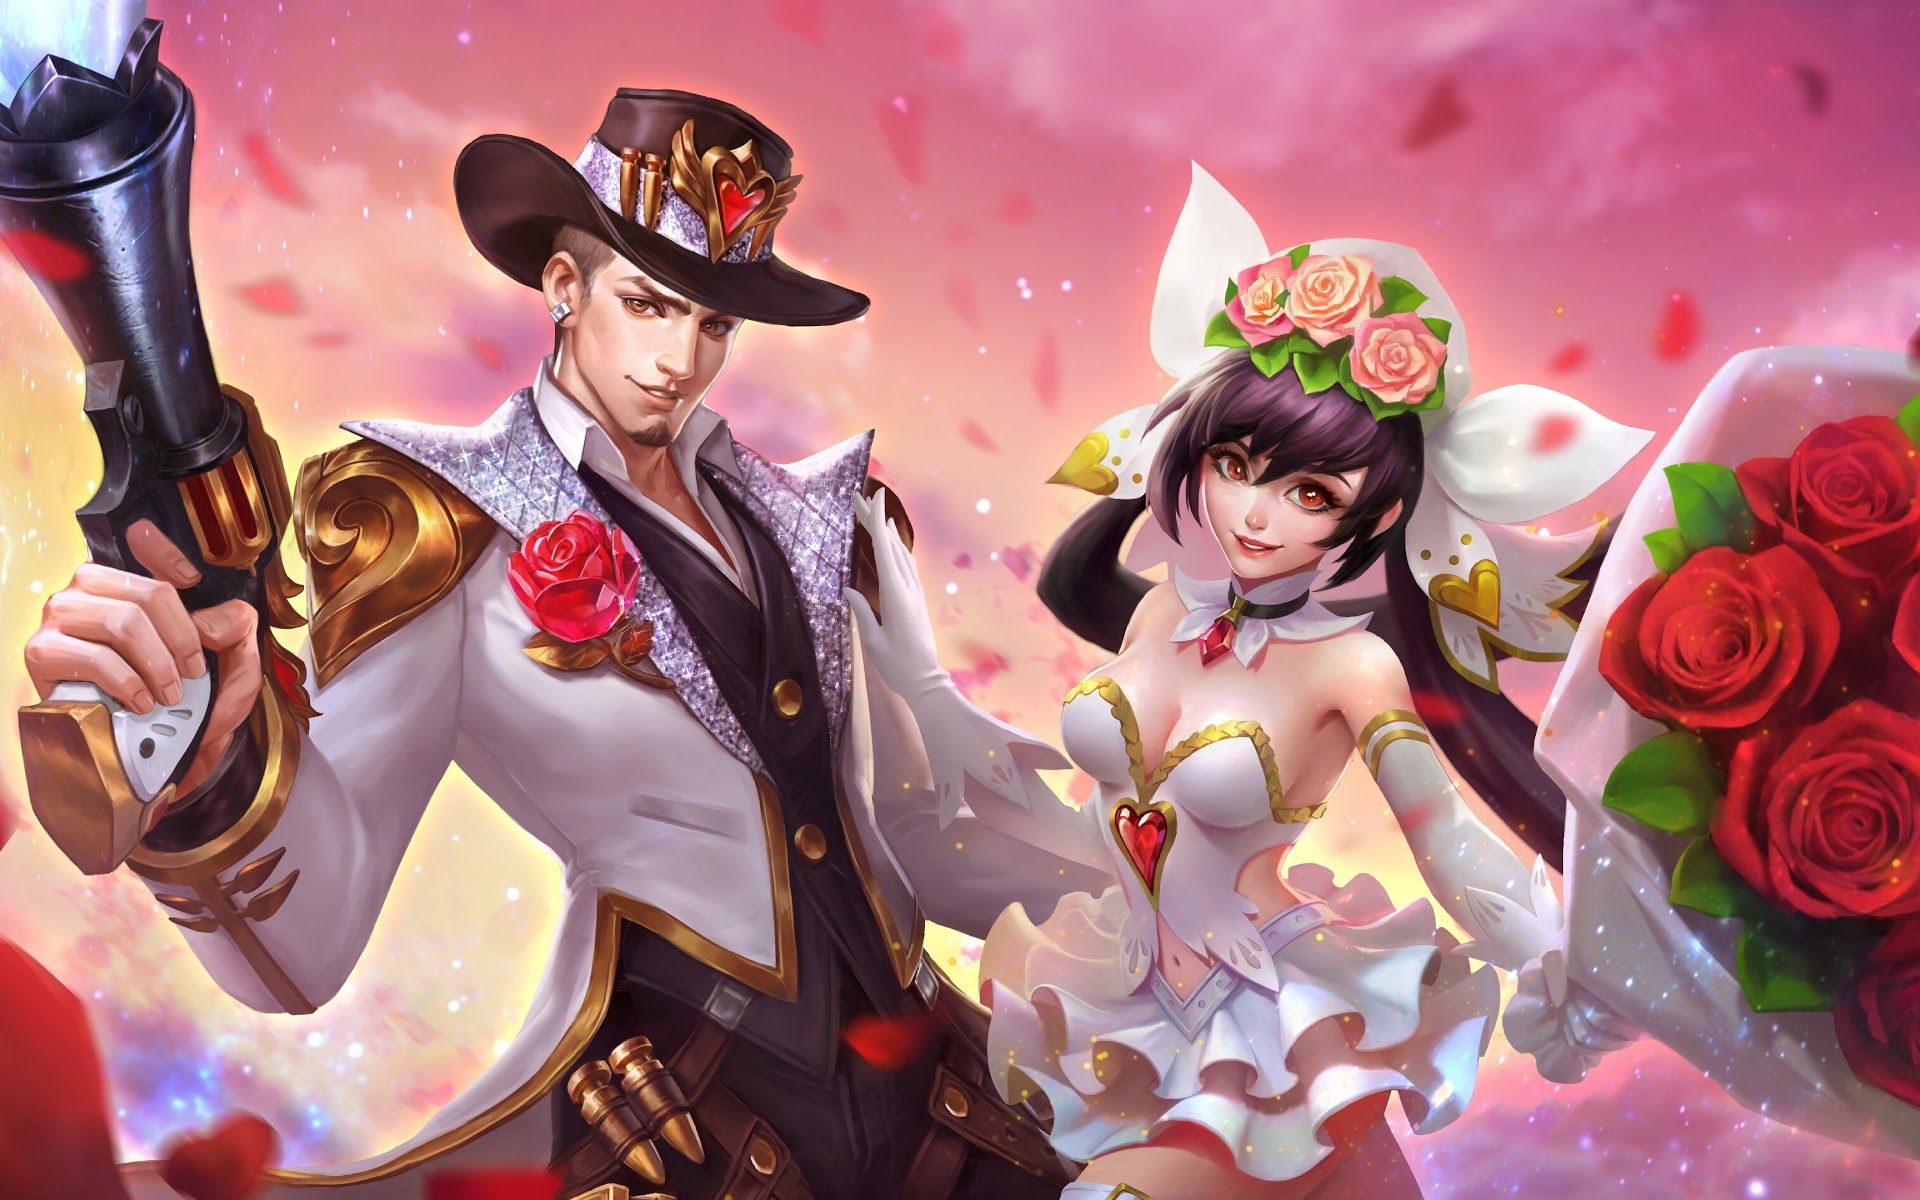 Clint Gun and Roses Layla Cannon and Roses Skins Mobile Legends 4K Wallpaper